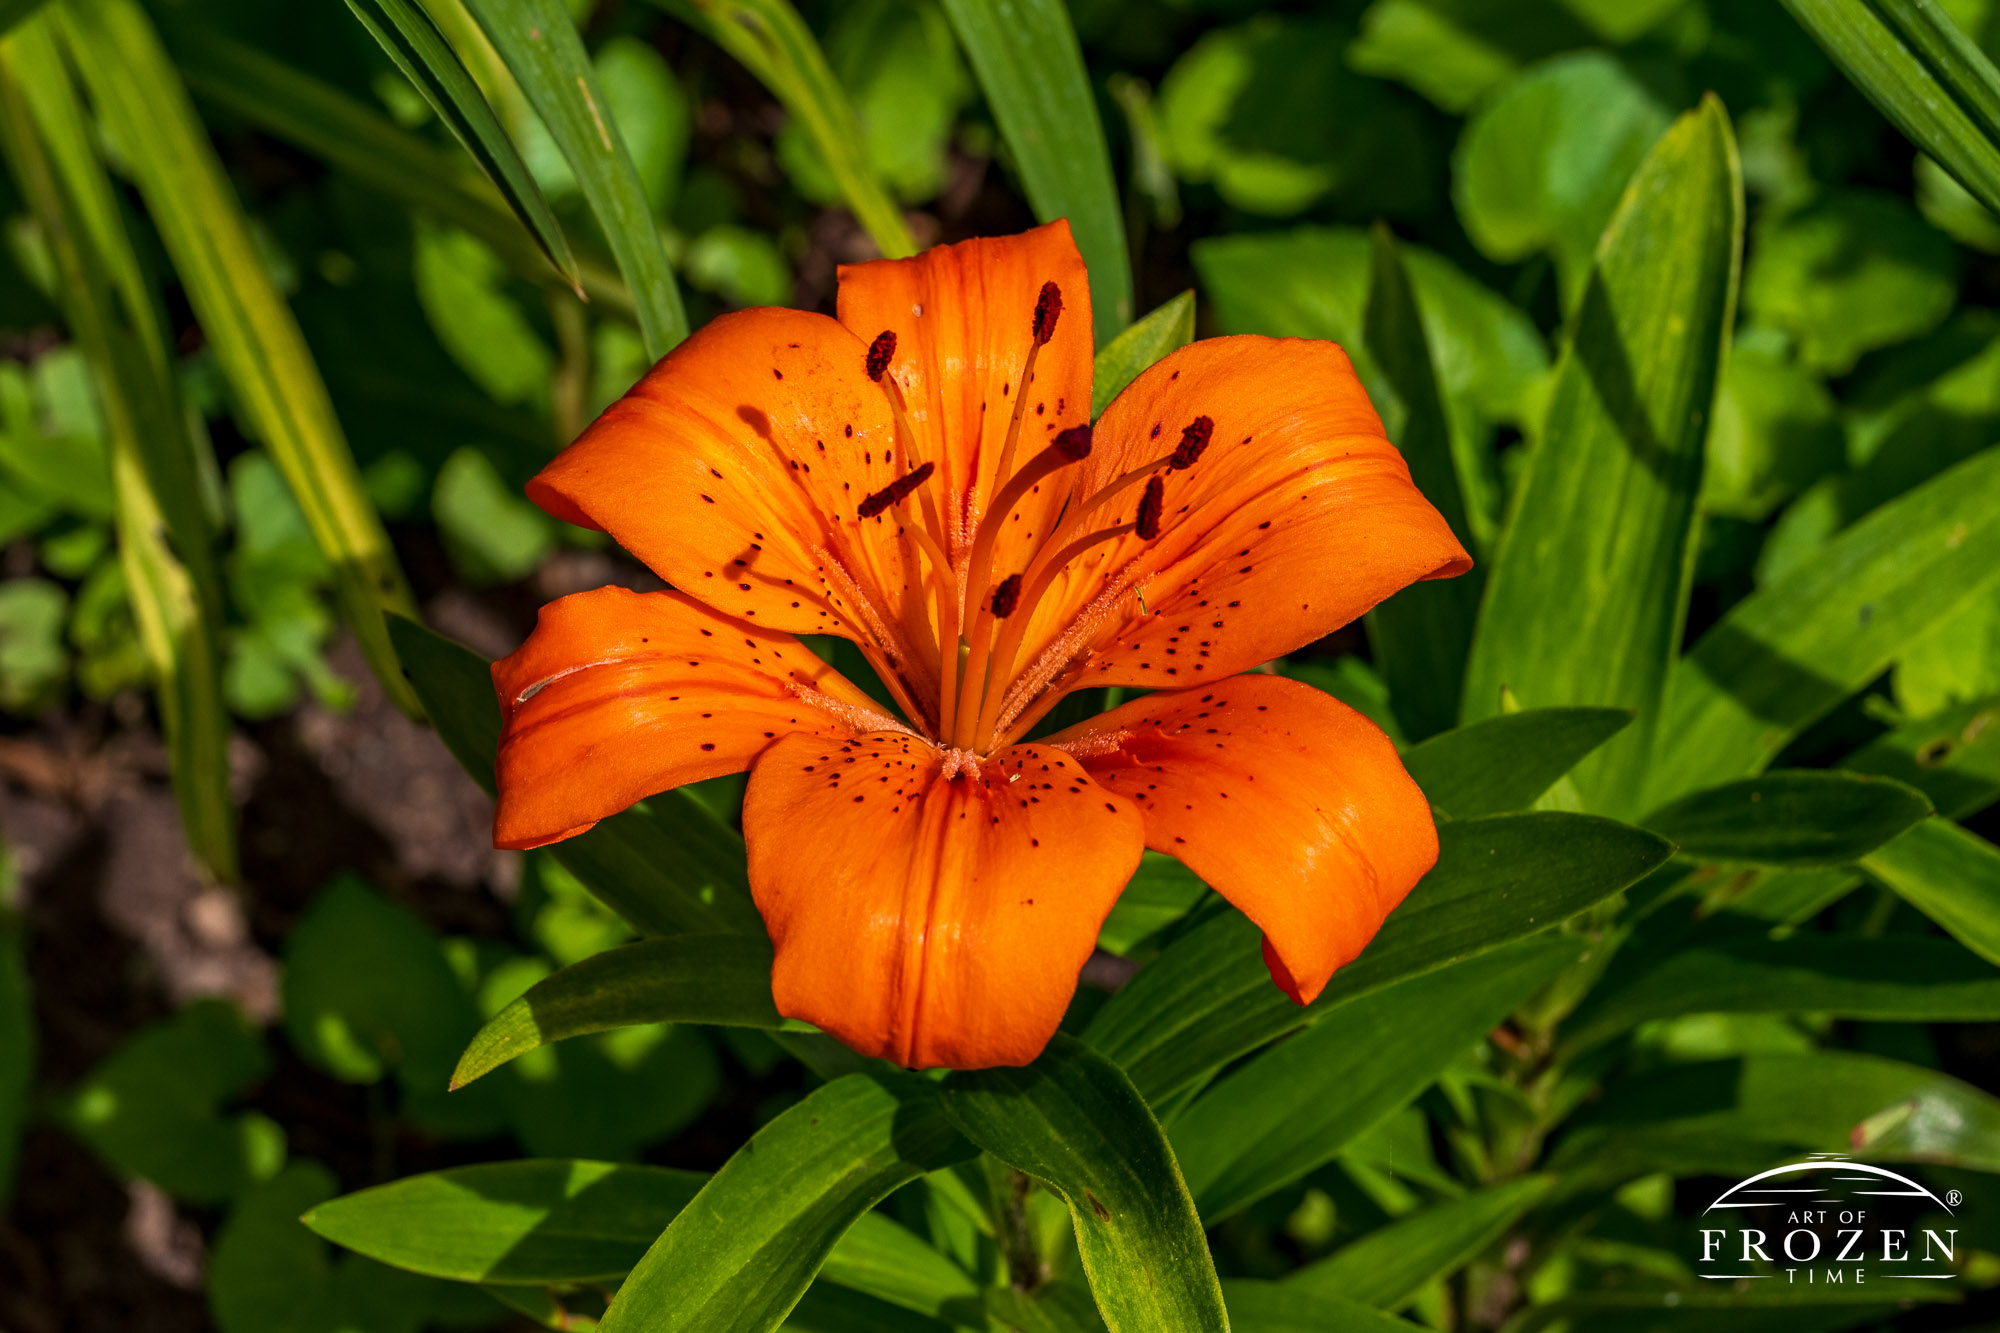 A view of an Orange Asiatic Lily in full sunlight featuring brown spots and reddish brown anthers